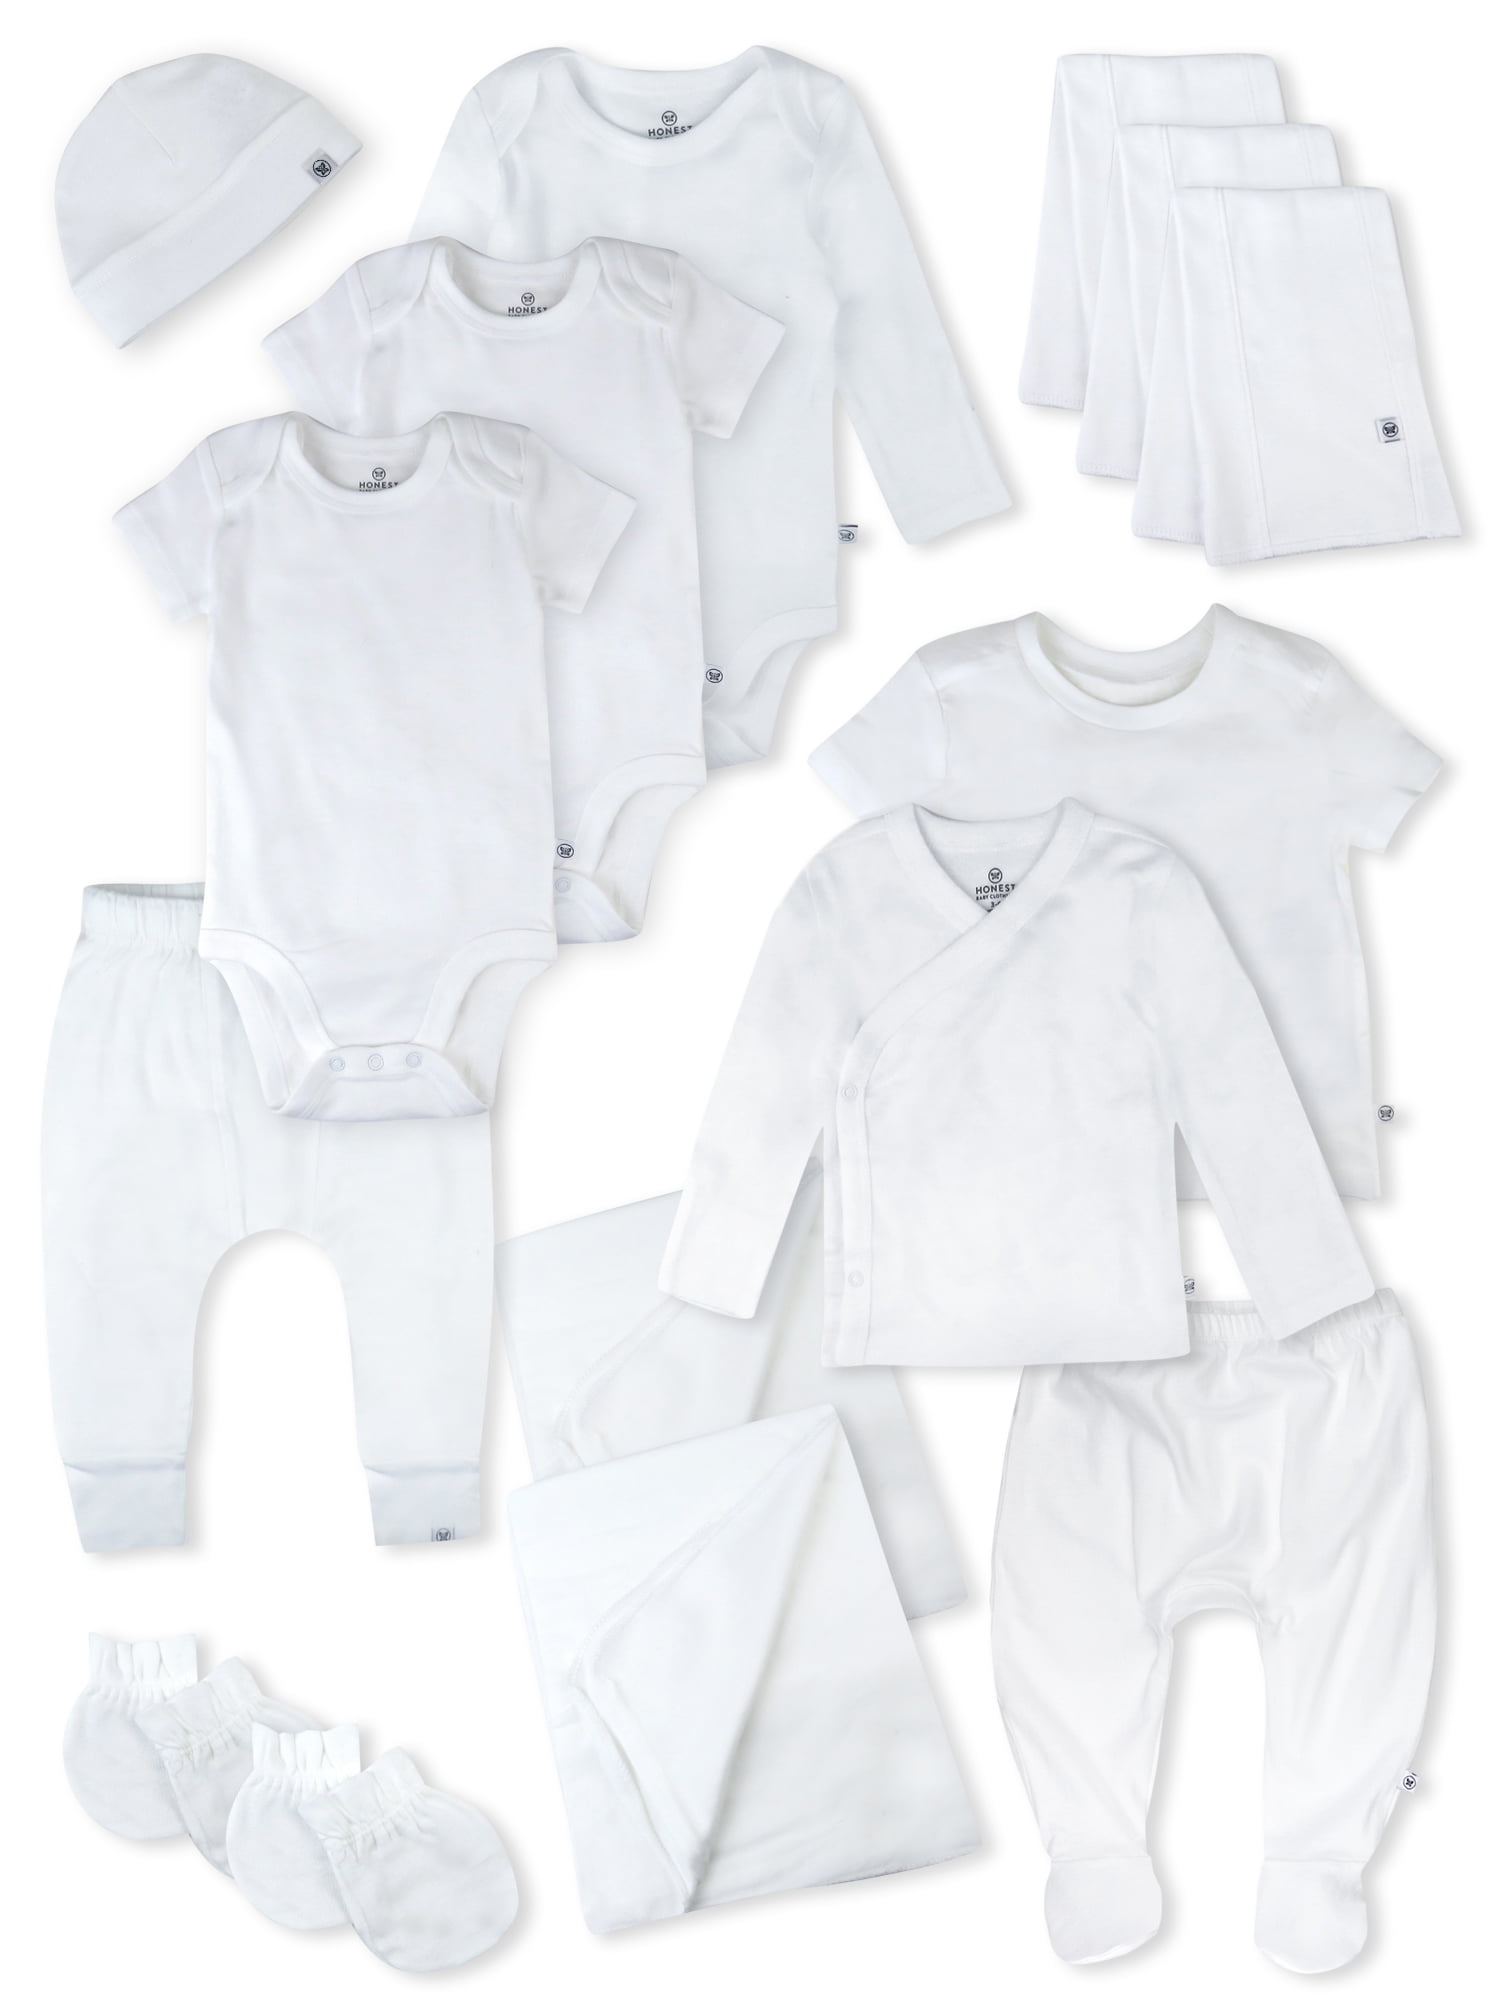 BNWT Bebelle Brand Pack of 6 Baby Boy or Girl Nursery Cute White Clothes  Hangers